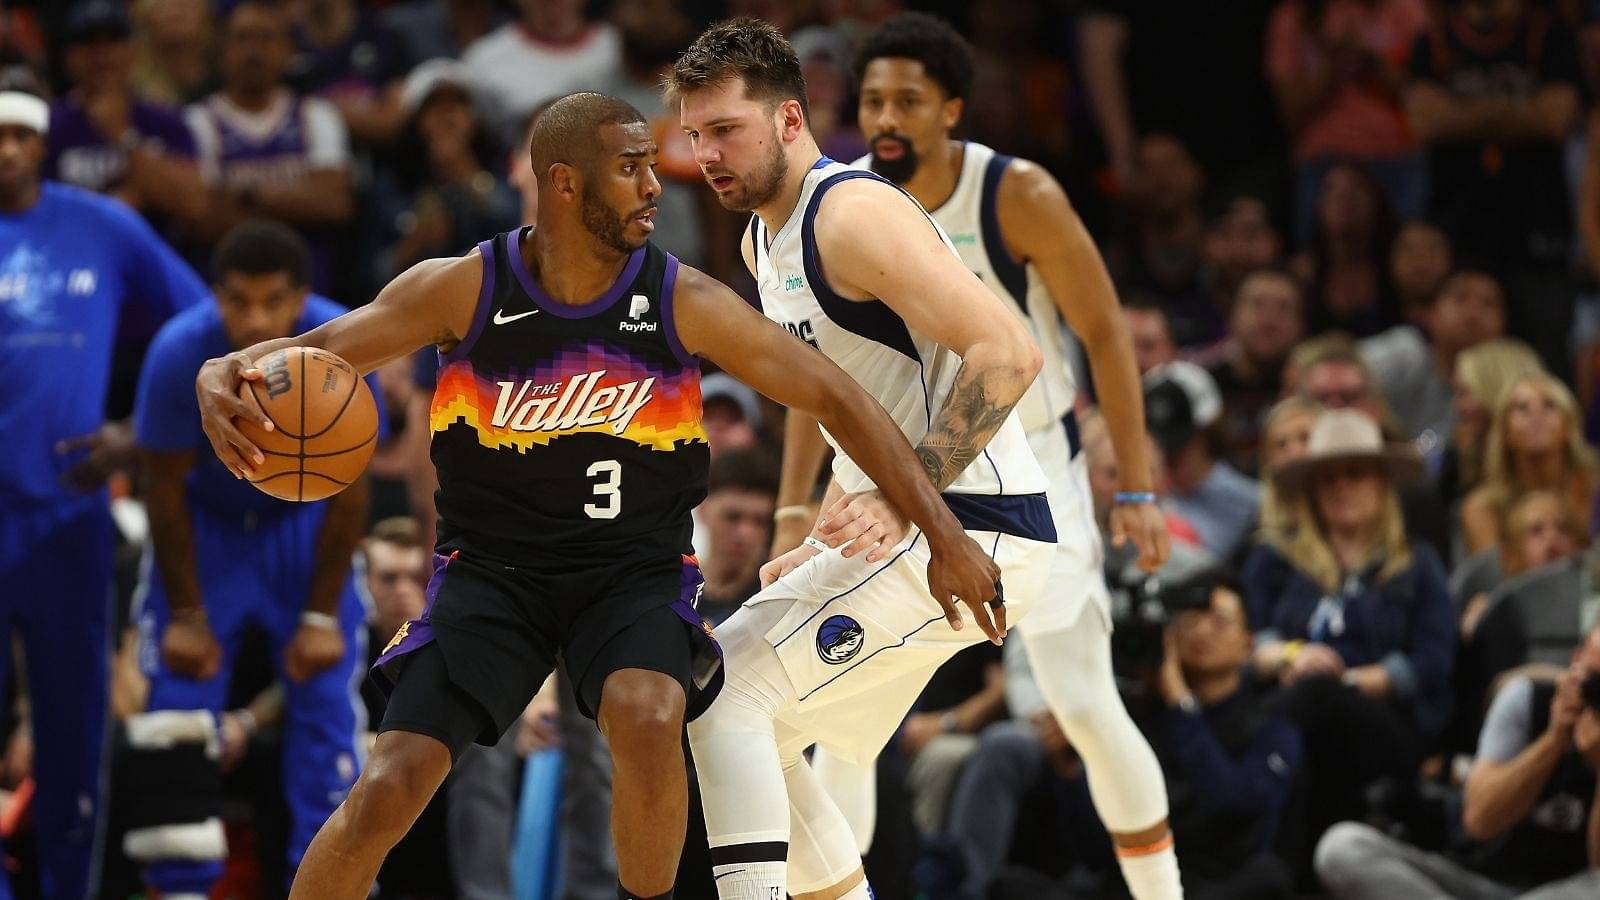 "Don't feel as bad seeing Chris Paul and Suns cook other teams": CJ McCollum, LeBron James and NBA community reacts to Point God's surgical display in dissecting the Mavericks